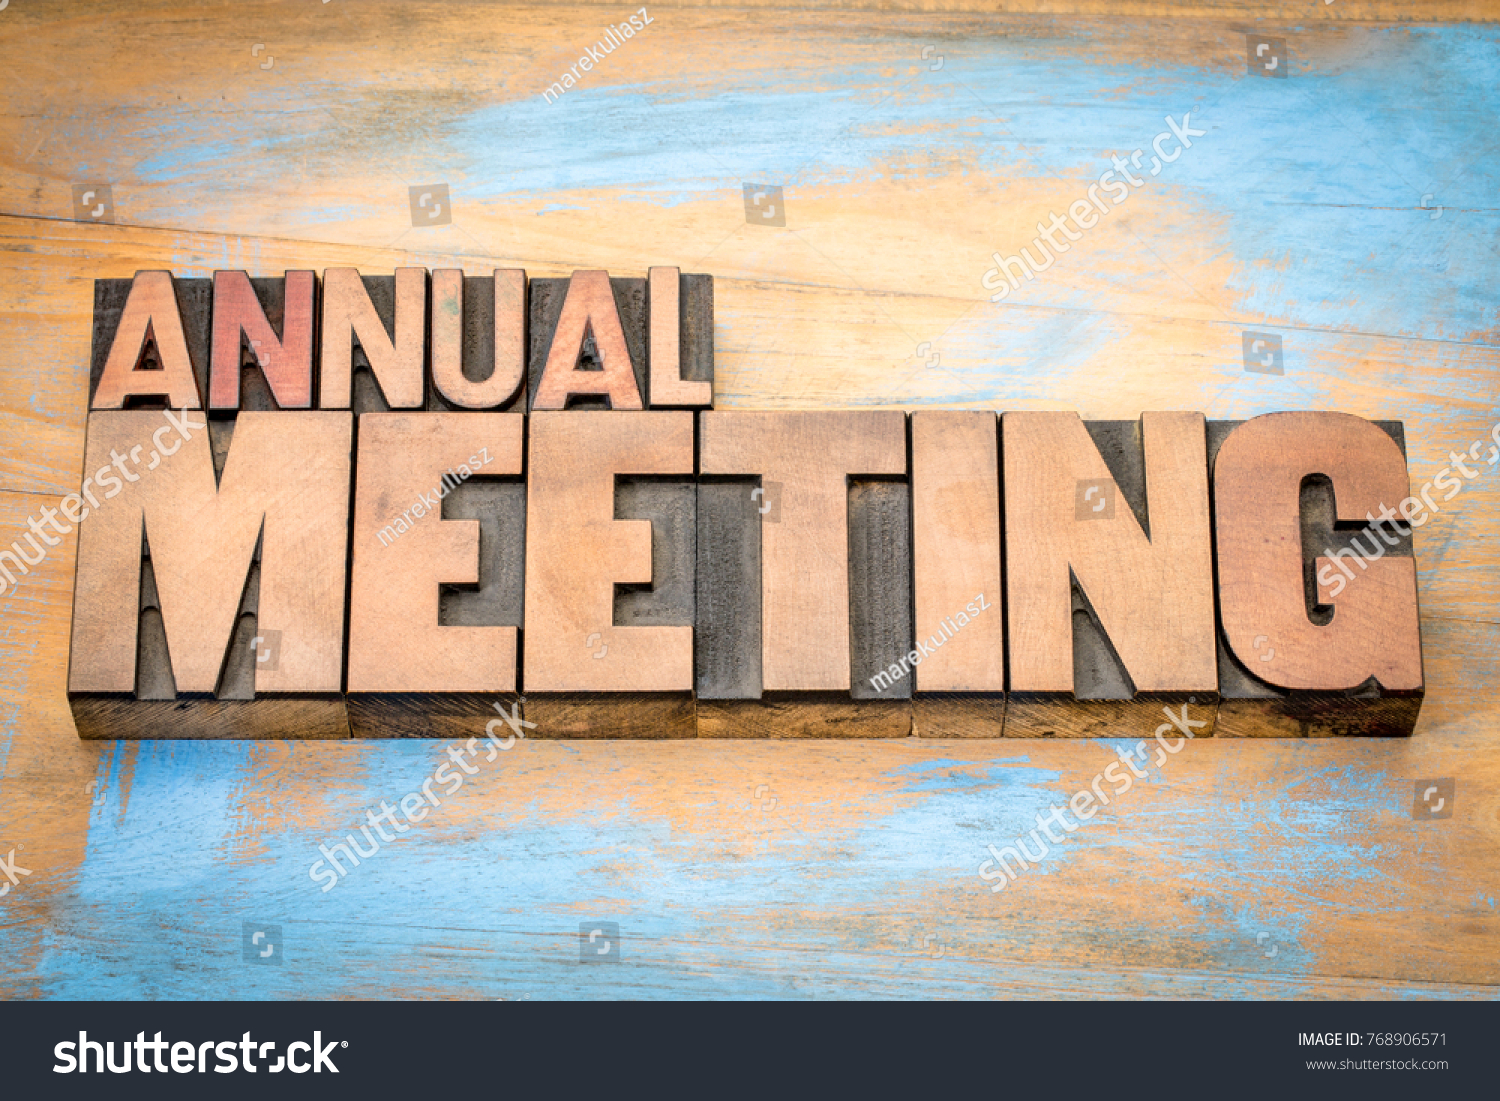 annual meeting word abstract in letterpress wood type against grunge wooden background #768906571